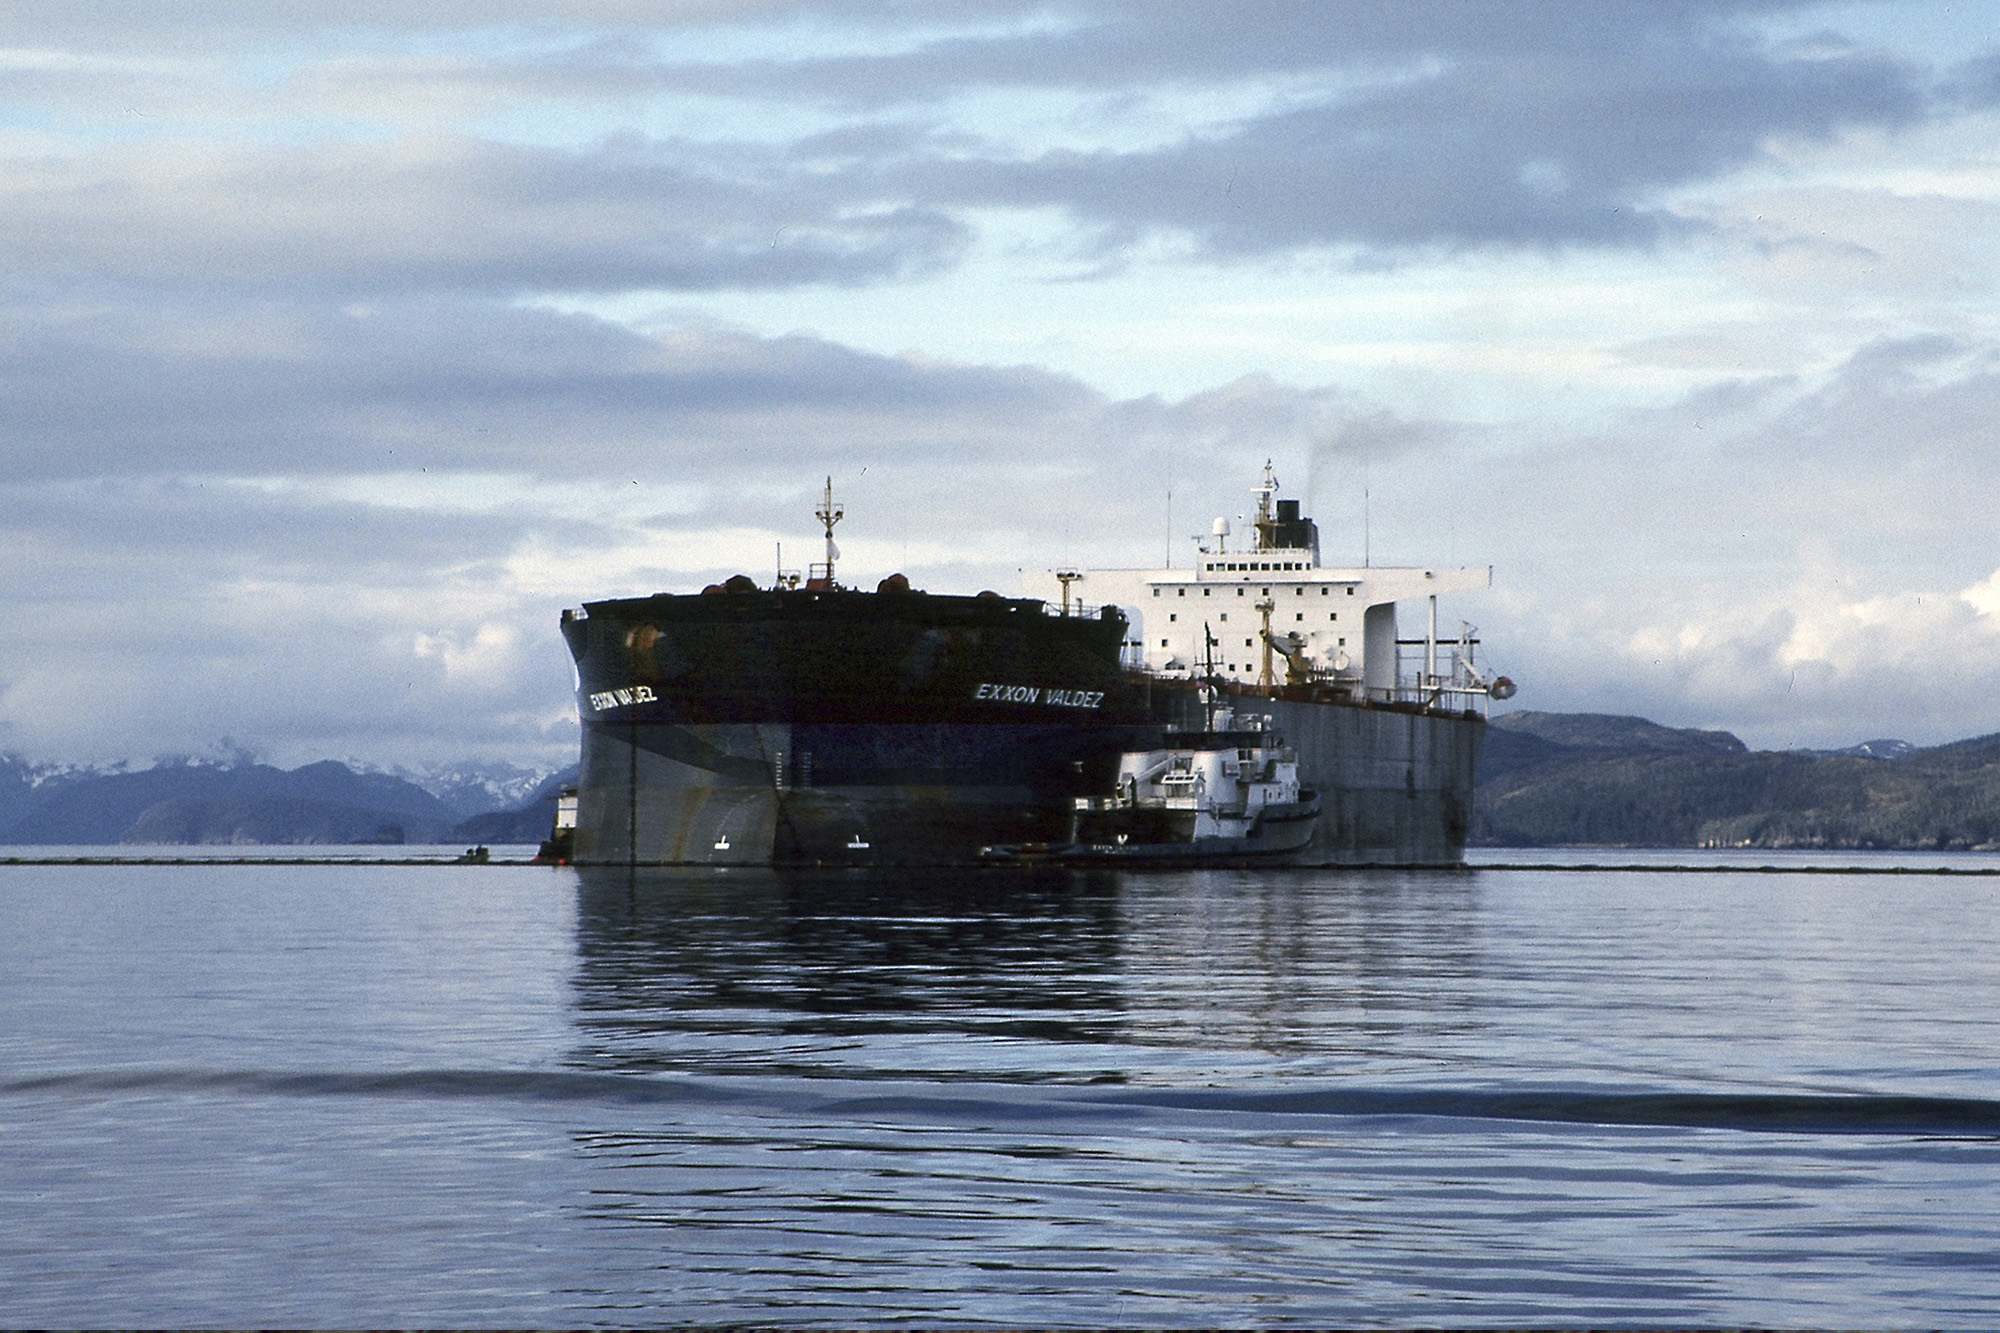 The Exxon Valdez oil tanker before it struck Bligh Reef. Photo courtesy of the National Oceanic and Atmospheric Administration